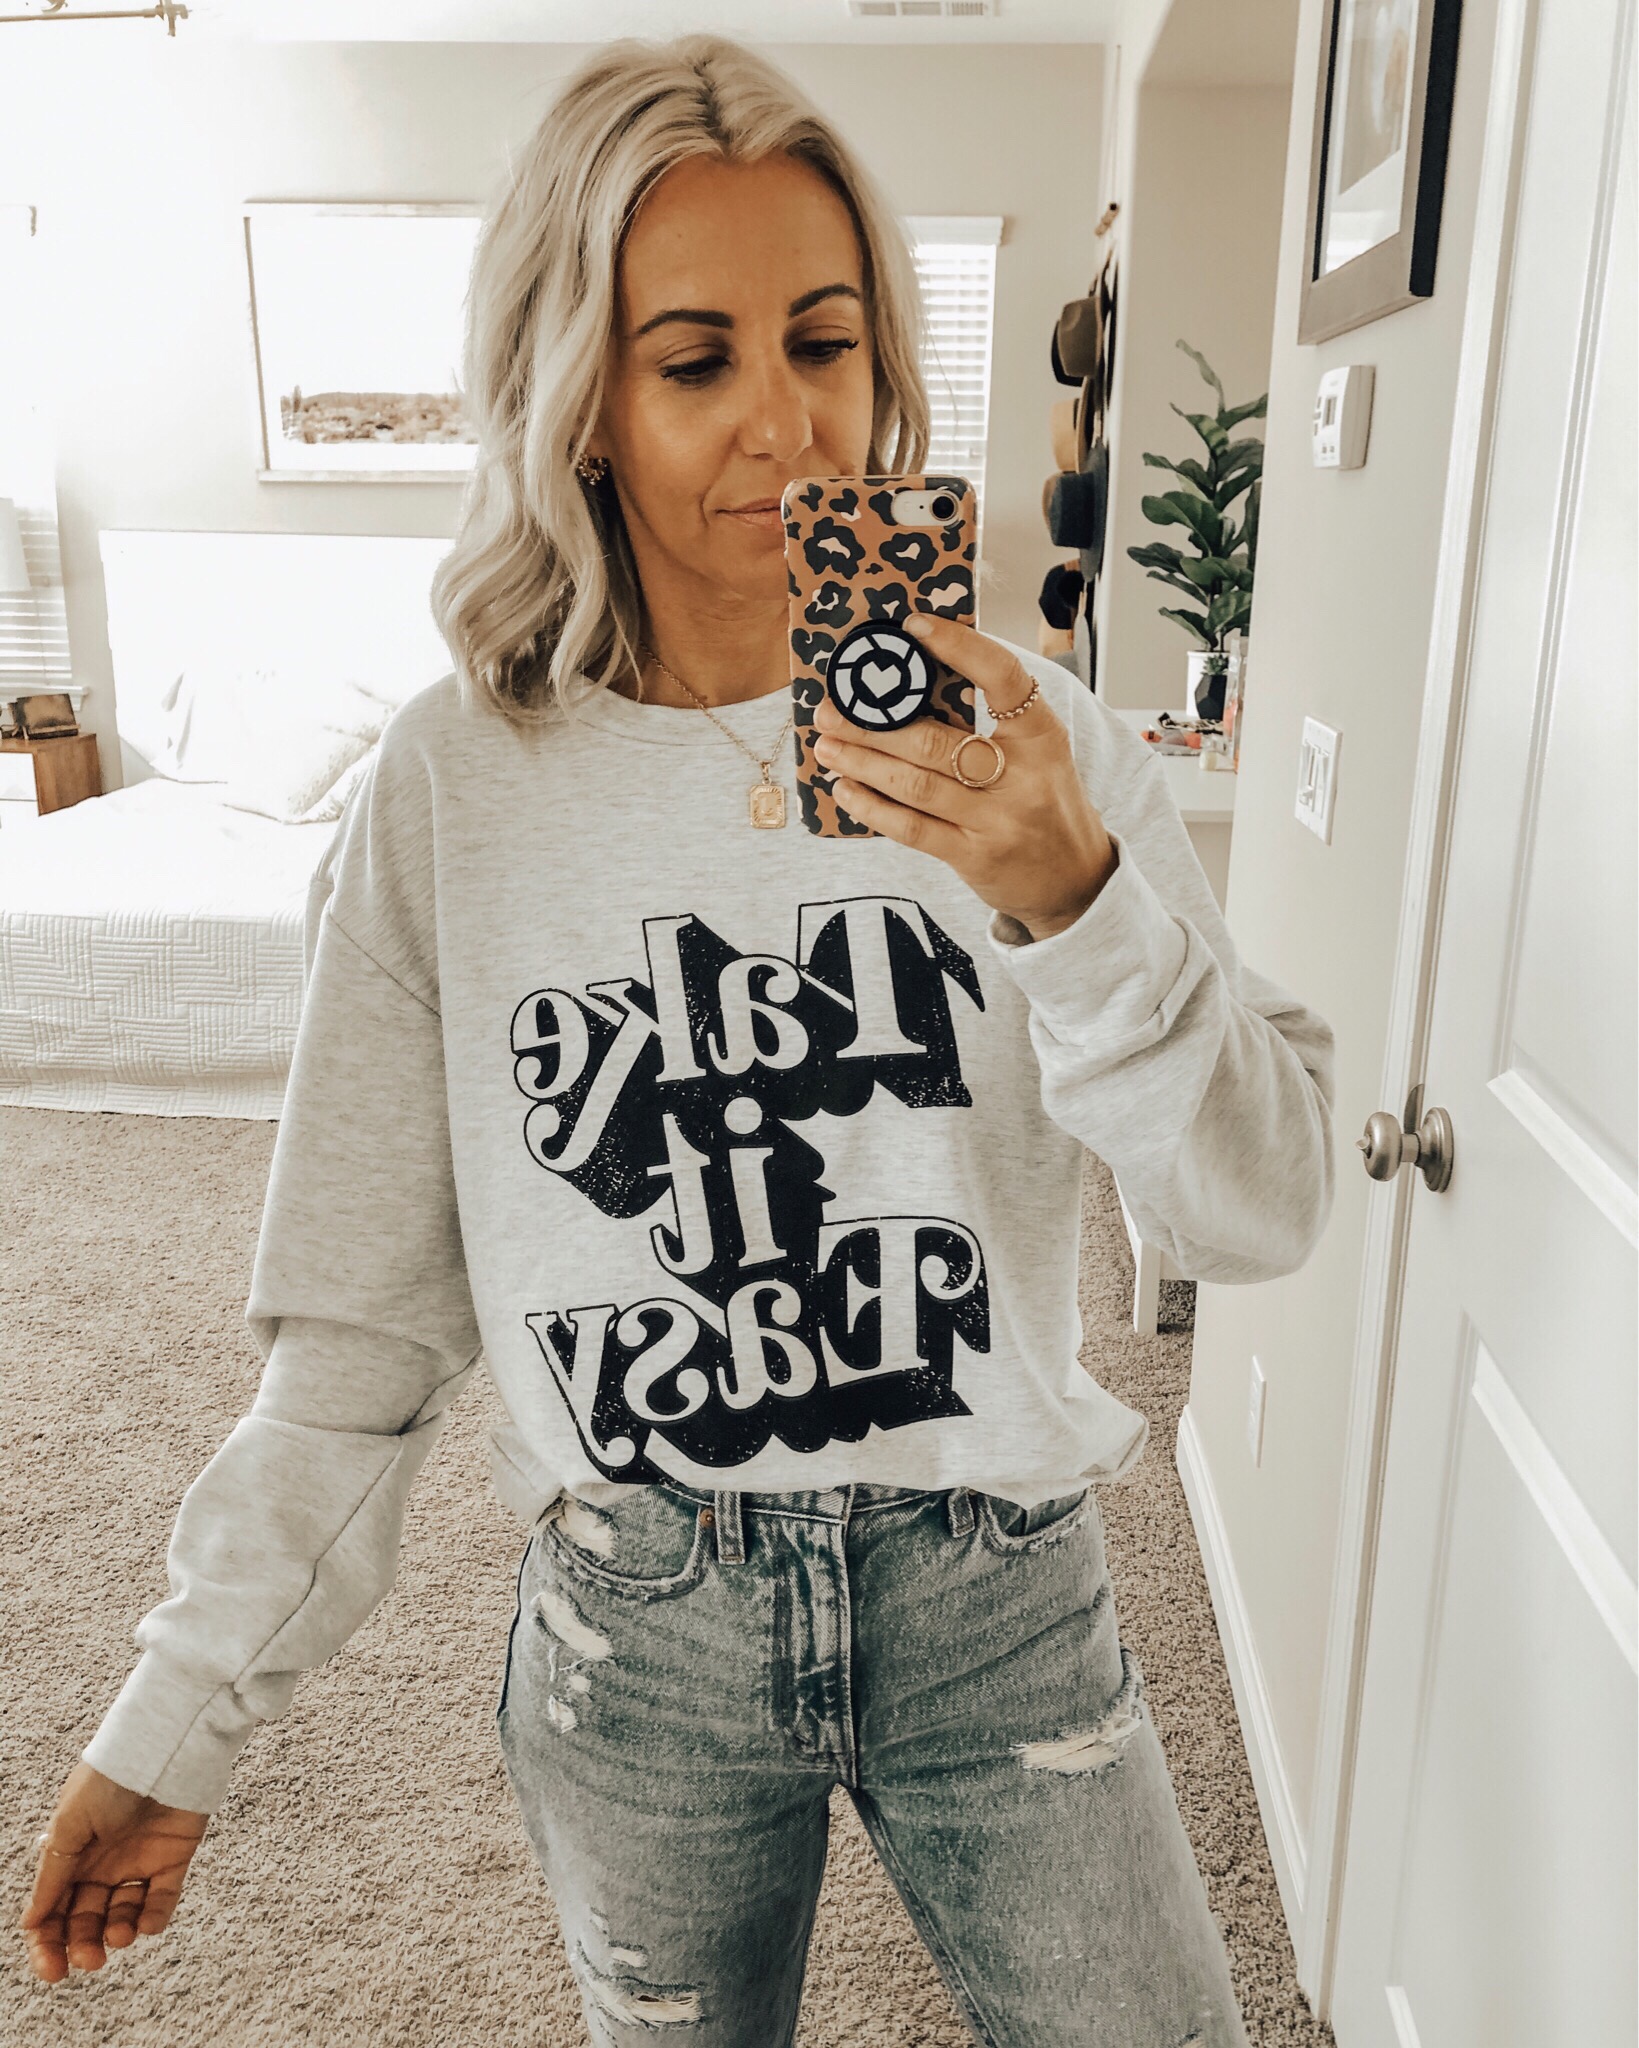 OCTOBER TOP 10- Jaclyn De Leon Style + Sharing the best selling items from the month of October which include a leopard sweater, huggie hoop earrings, graphic tees + sweatshirts, faux fur slippers, striped sweaters, western booties and denim